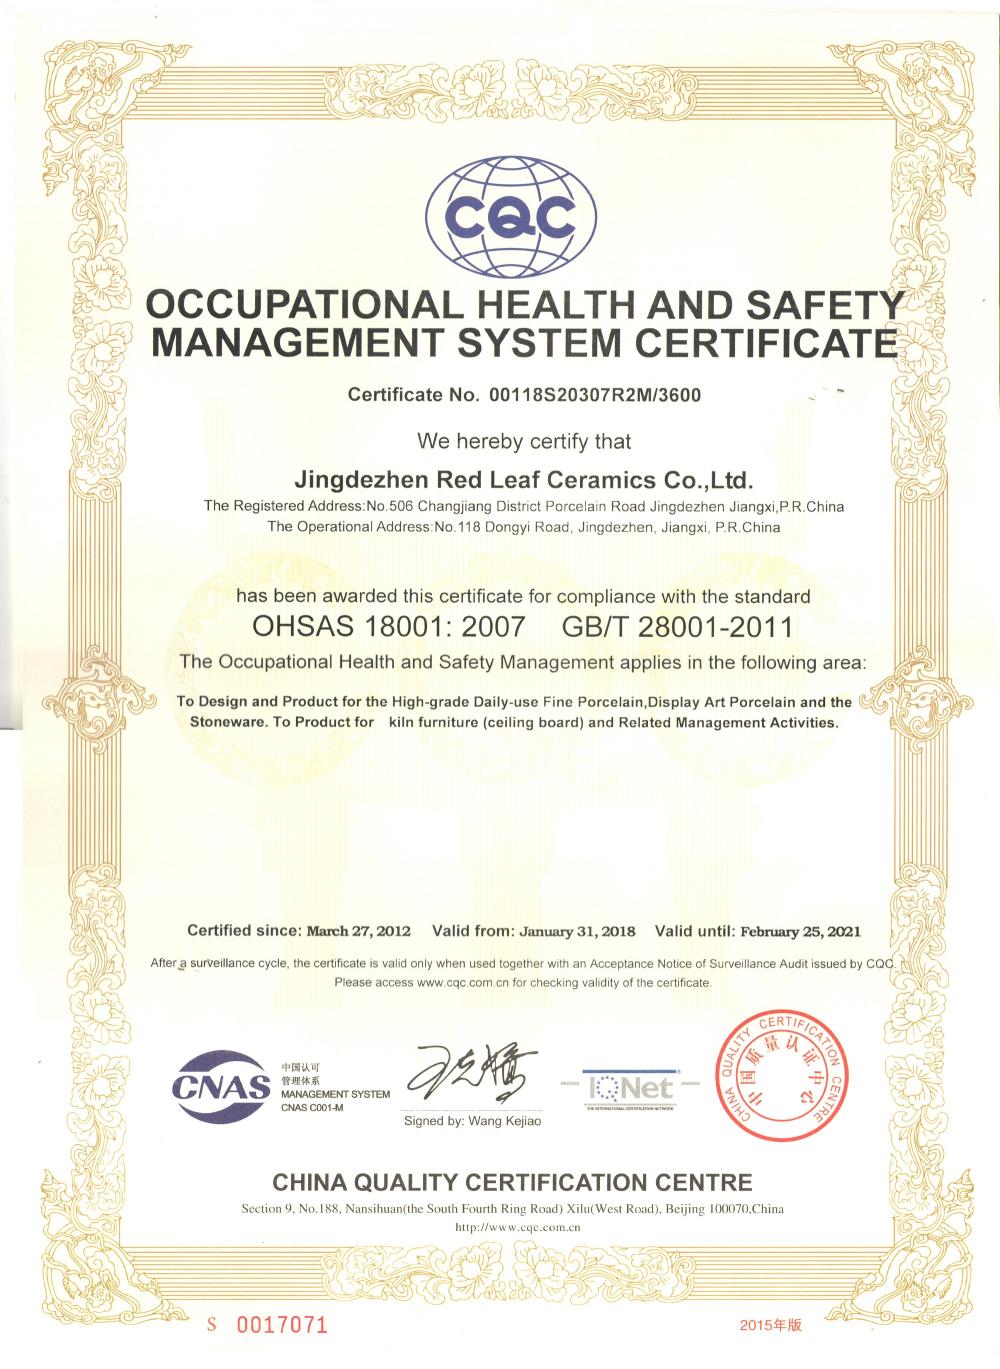 OCCUPATIONAL HEALTH AND SAFETY MANAGEMENT SYSTEM CERITIFICATE